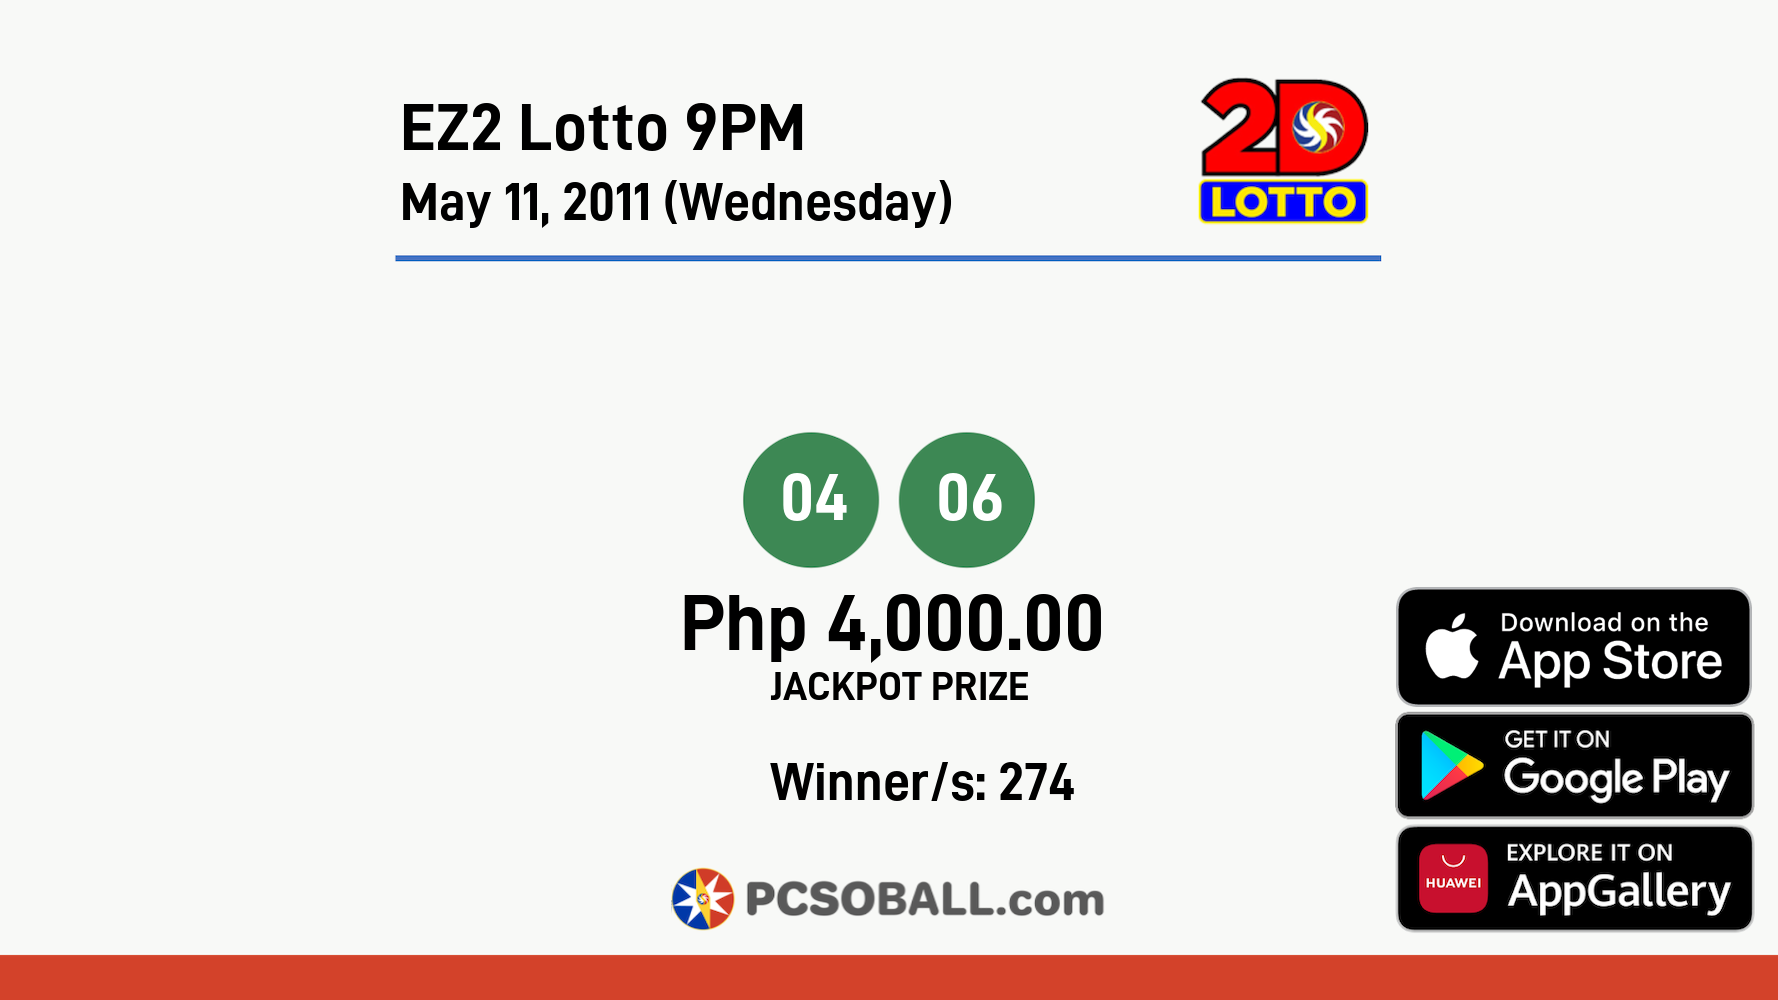 EZ2 Lotto 9PM May 11, 2011 (Wednesday) Result